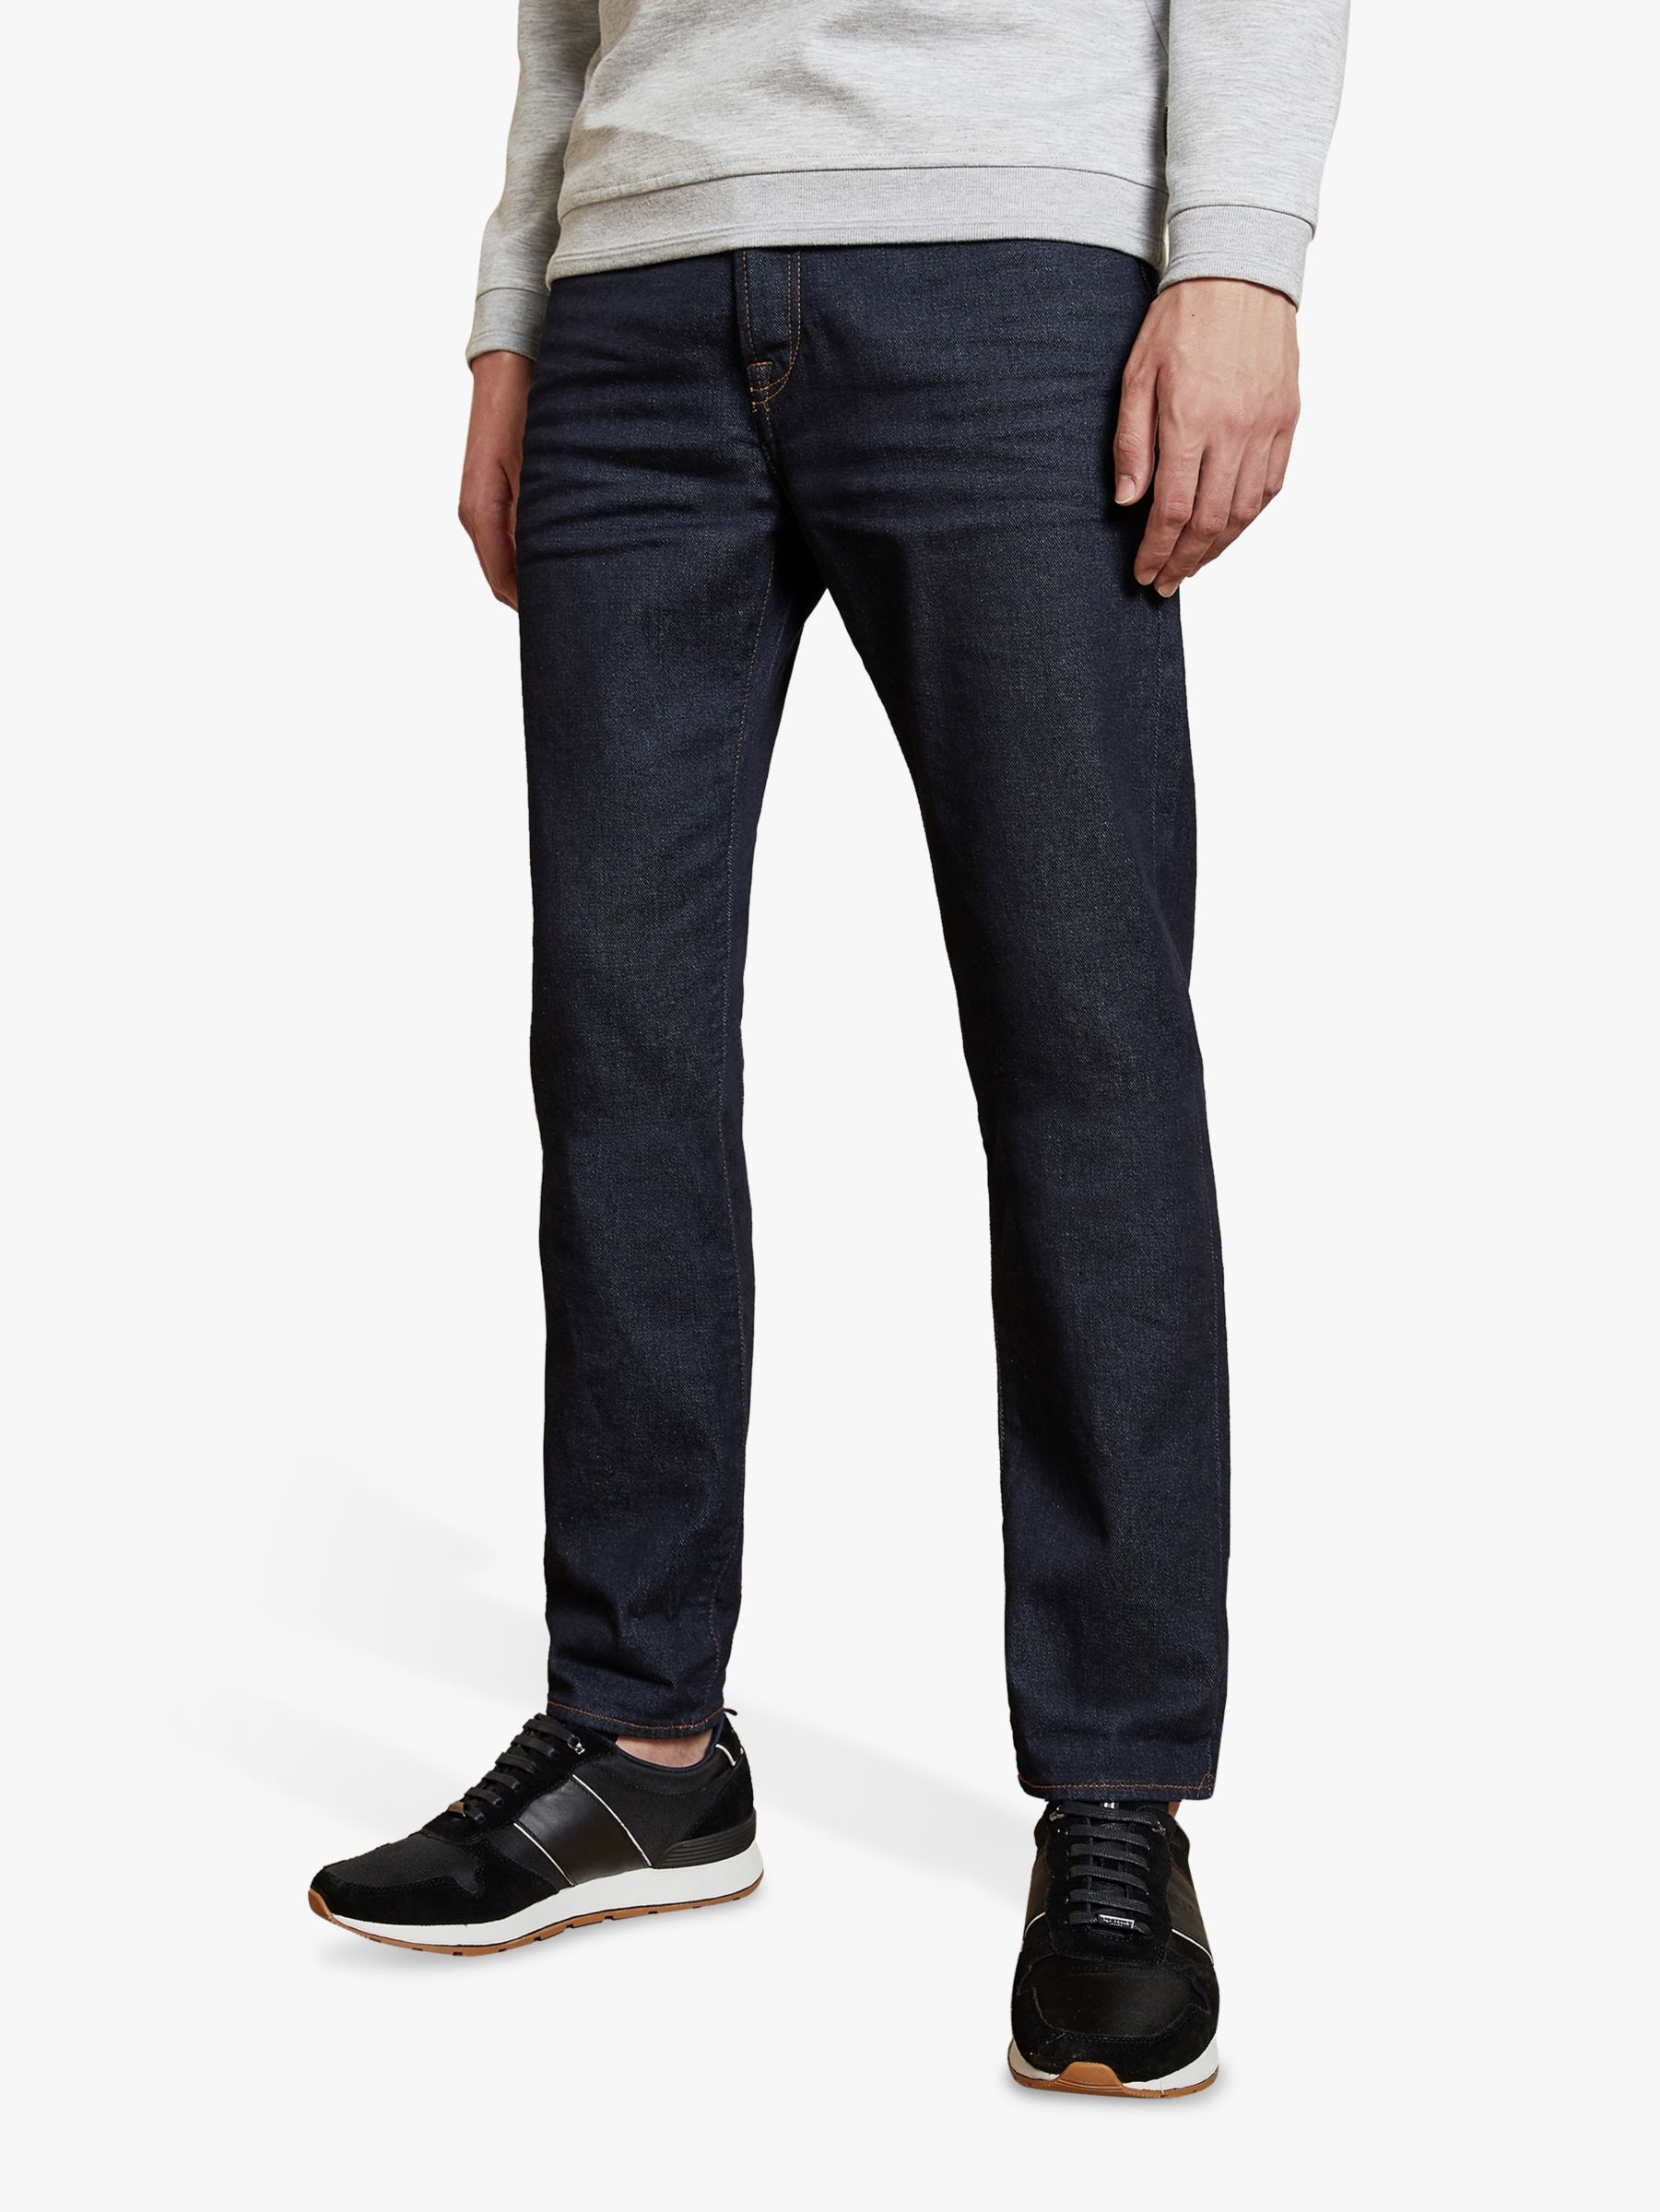 Ted Baker Sakes Straight Fit Jeans, Navy